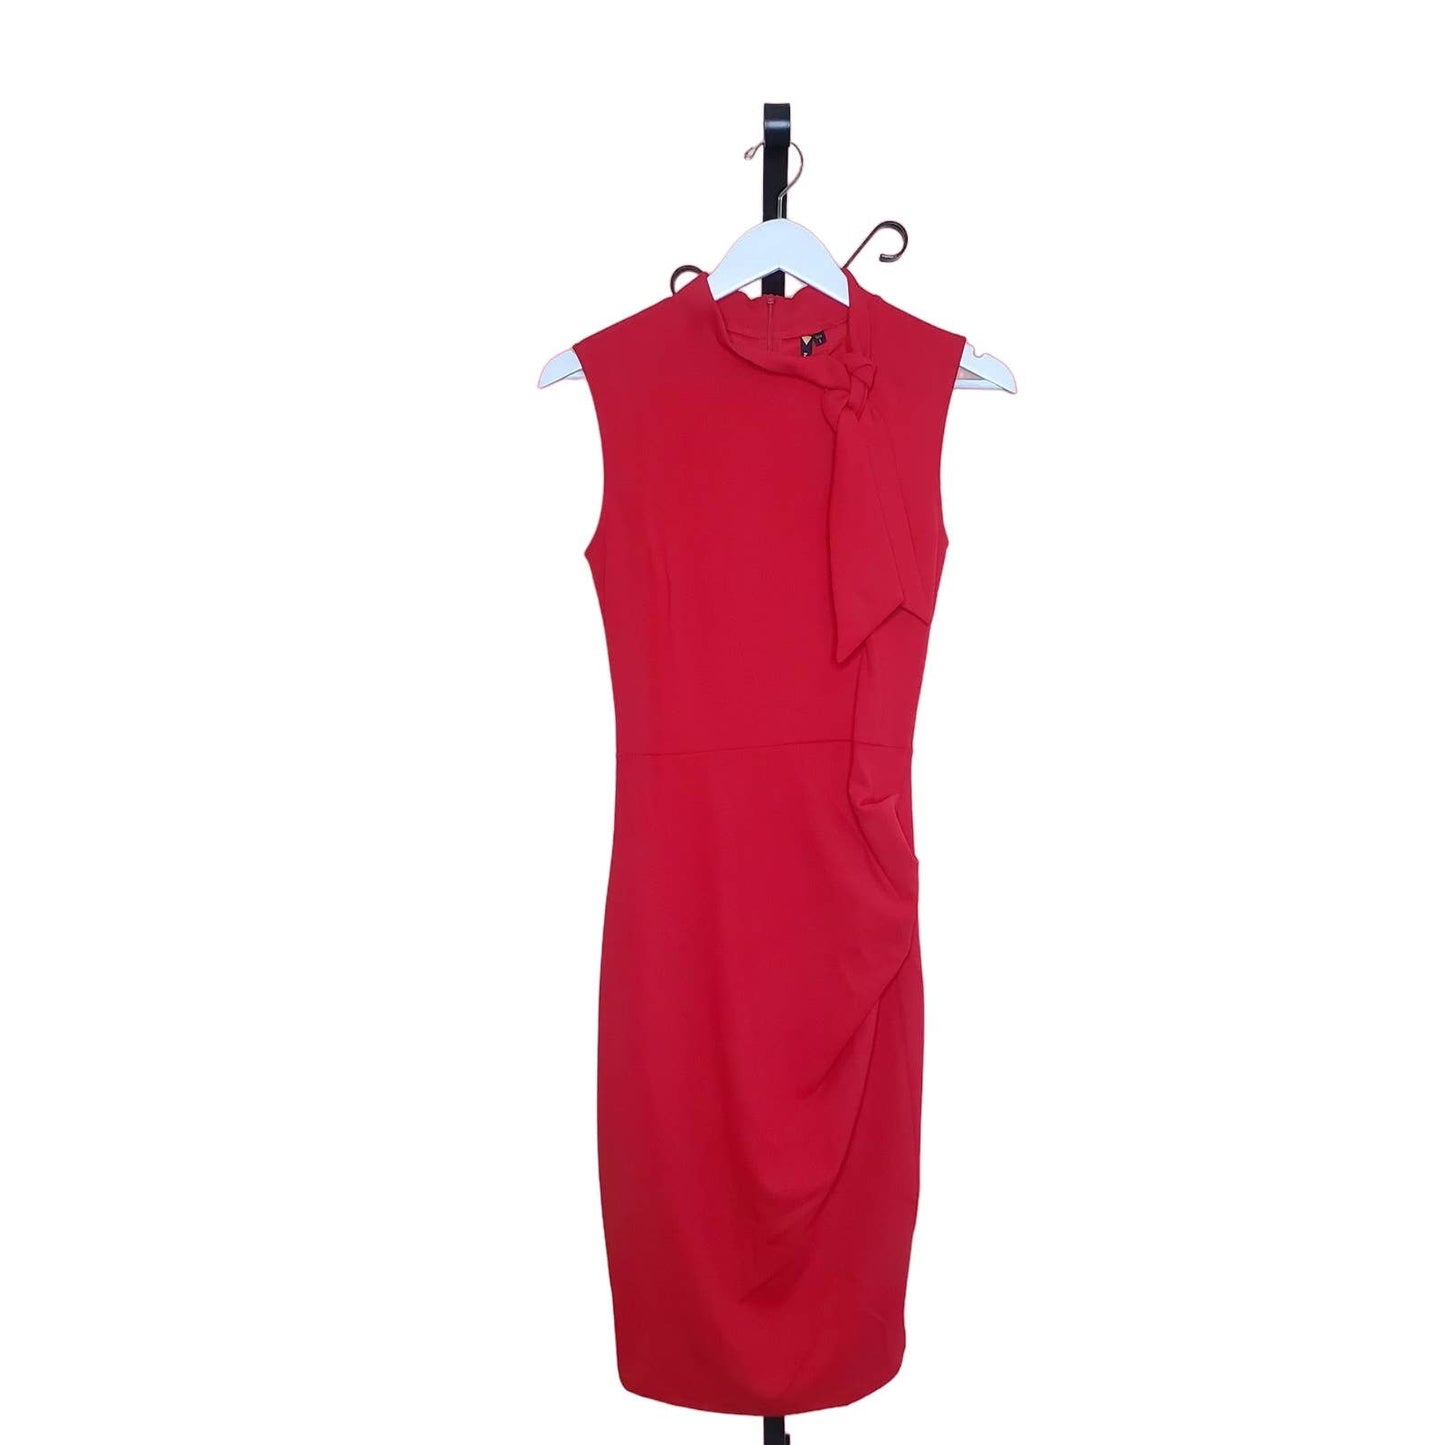 NEW Miusol Red Women's 1950's Style Ruffle Cocktail Pencil Dress, Size Small